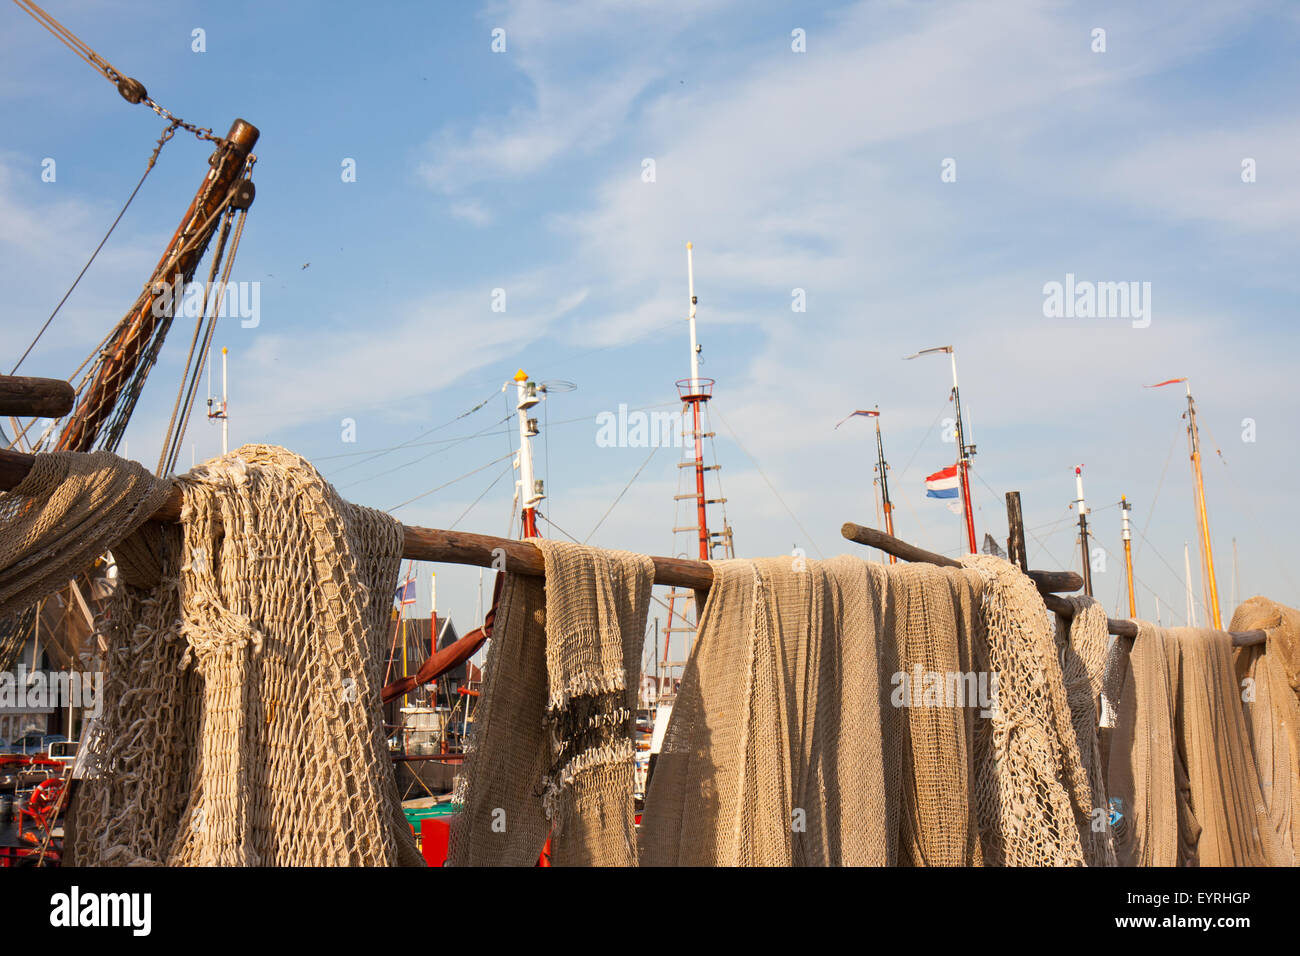 Fishing nets drying in the sun alongside the harbour Stock Photo